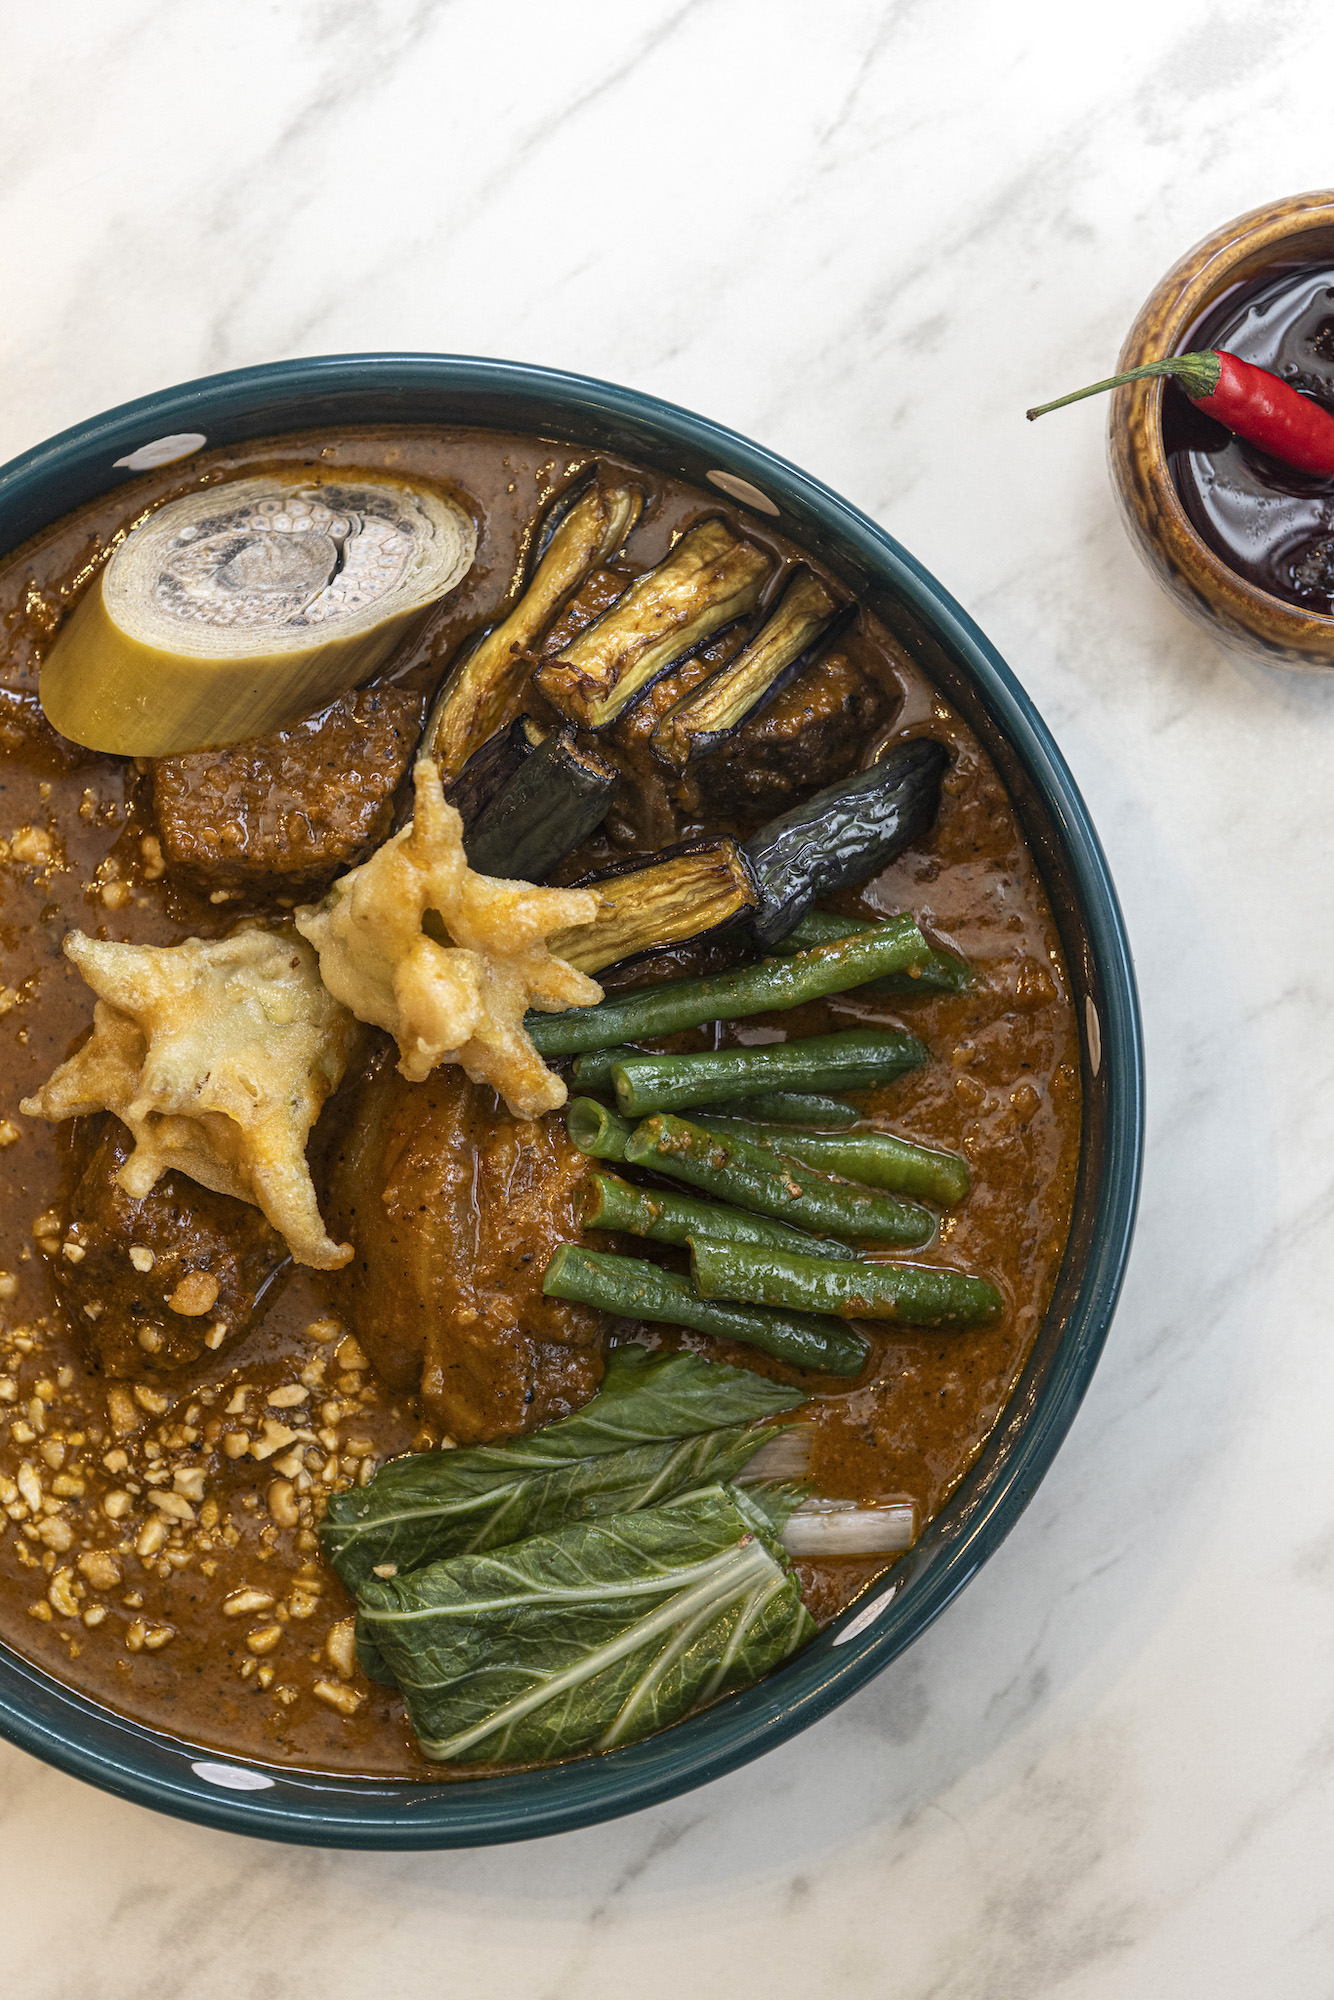 Esmeralda kare-kare: Beef and oxtail peanut stew with eggplant, string beans, and pechay served with their signature bagoong